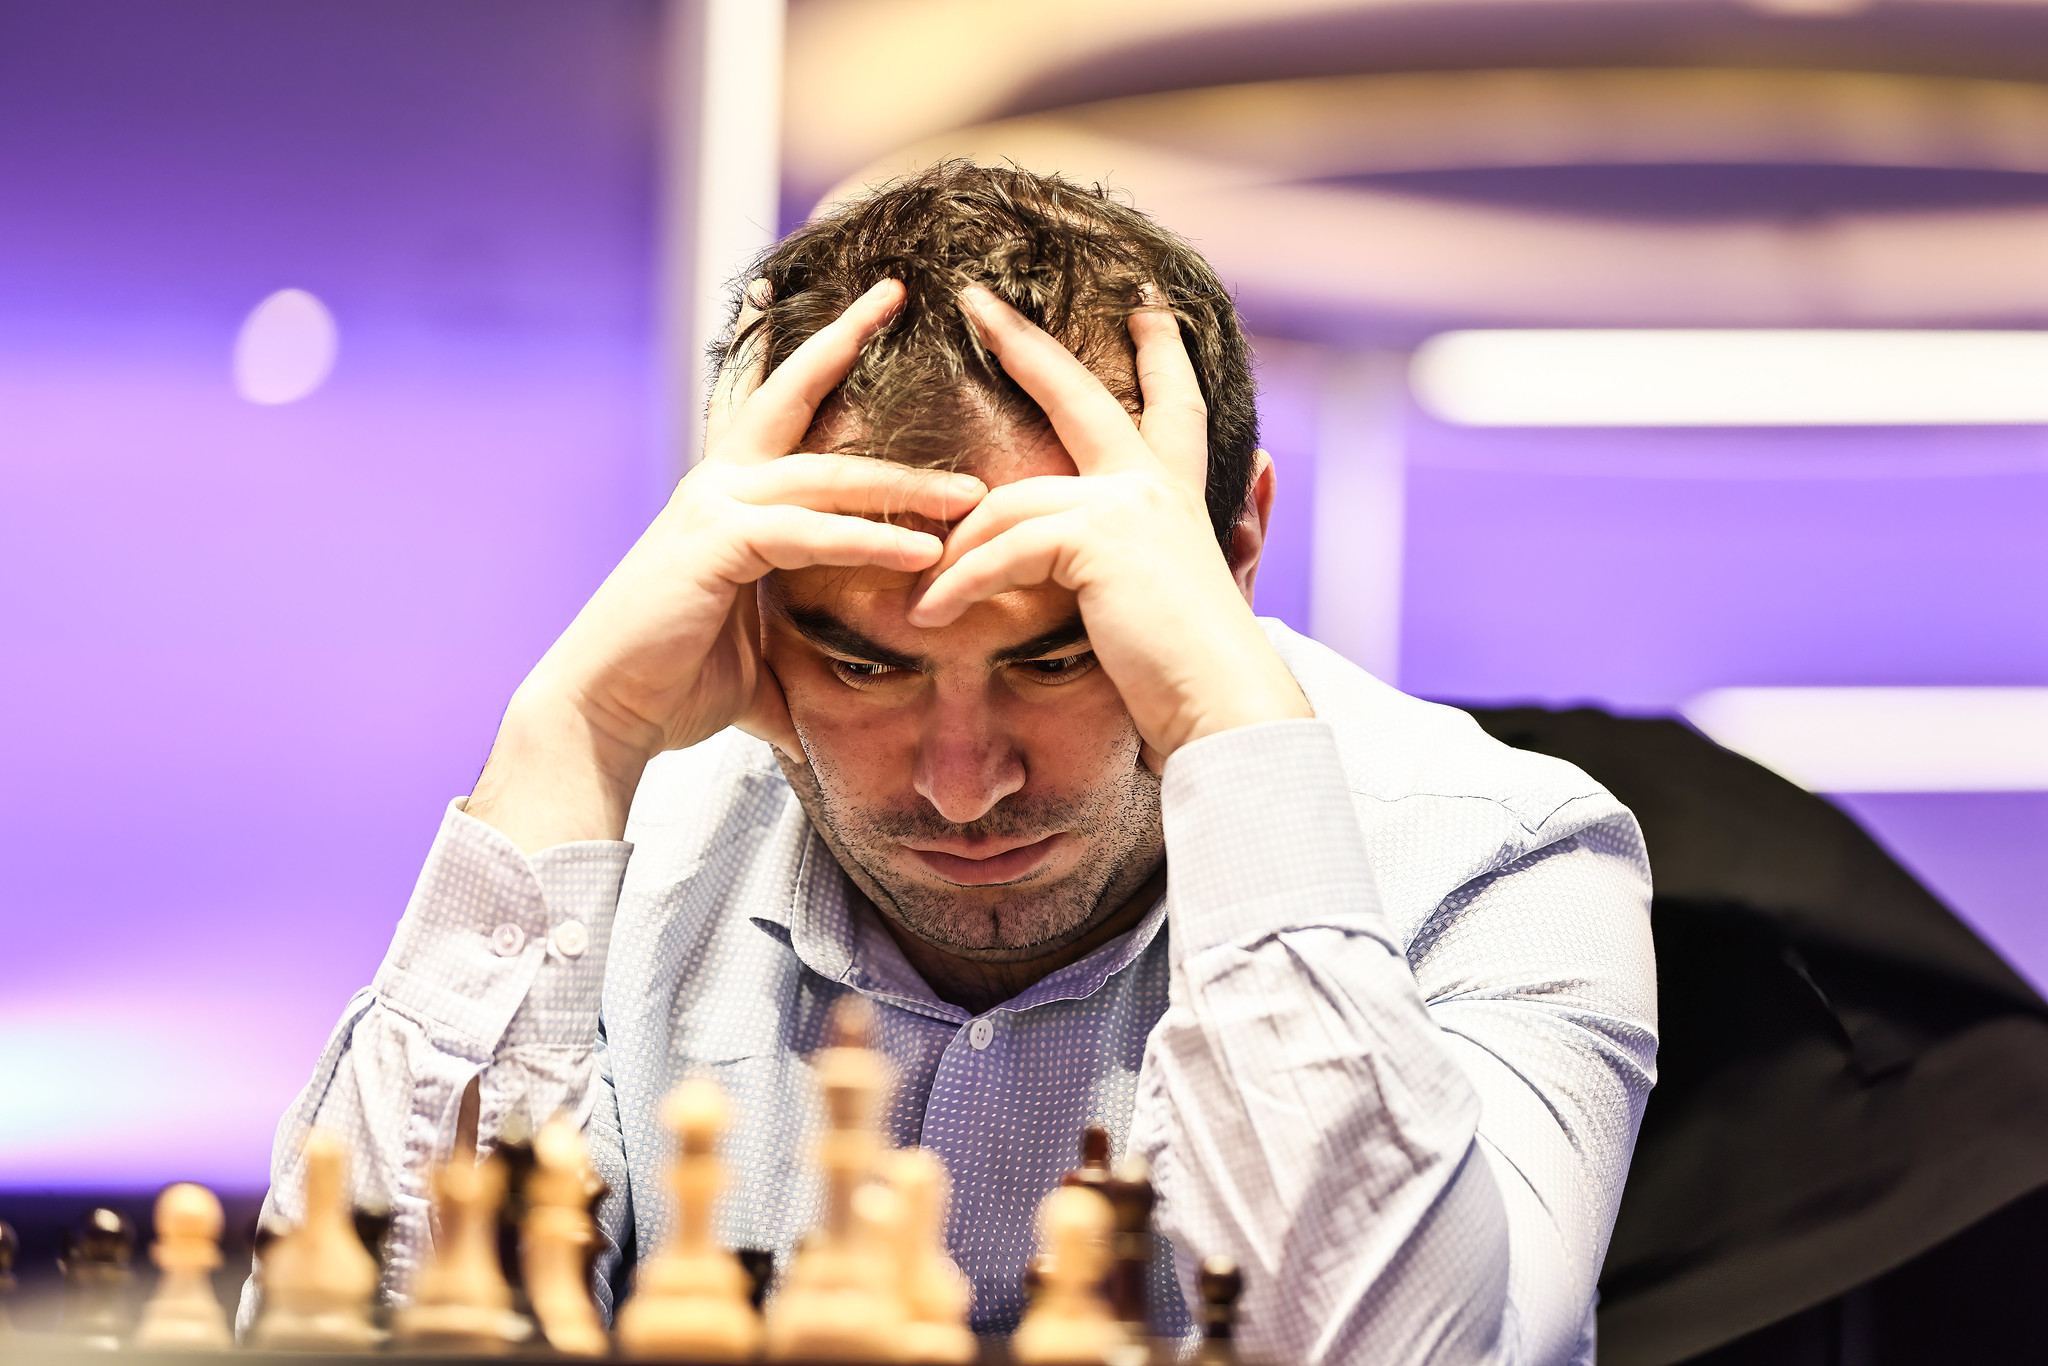 Wins for Rapport and Mamedyarov take them into a joint lead with